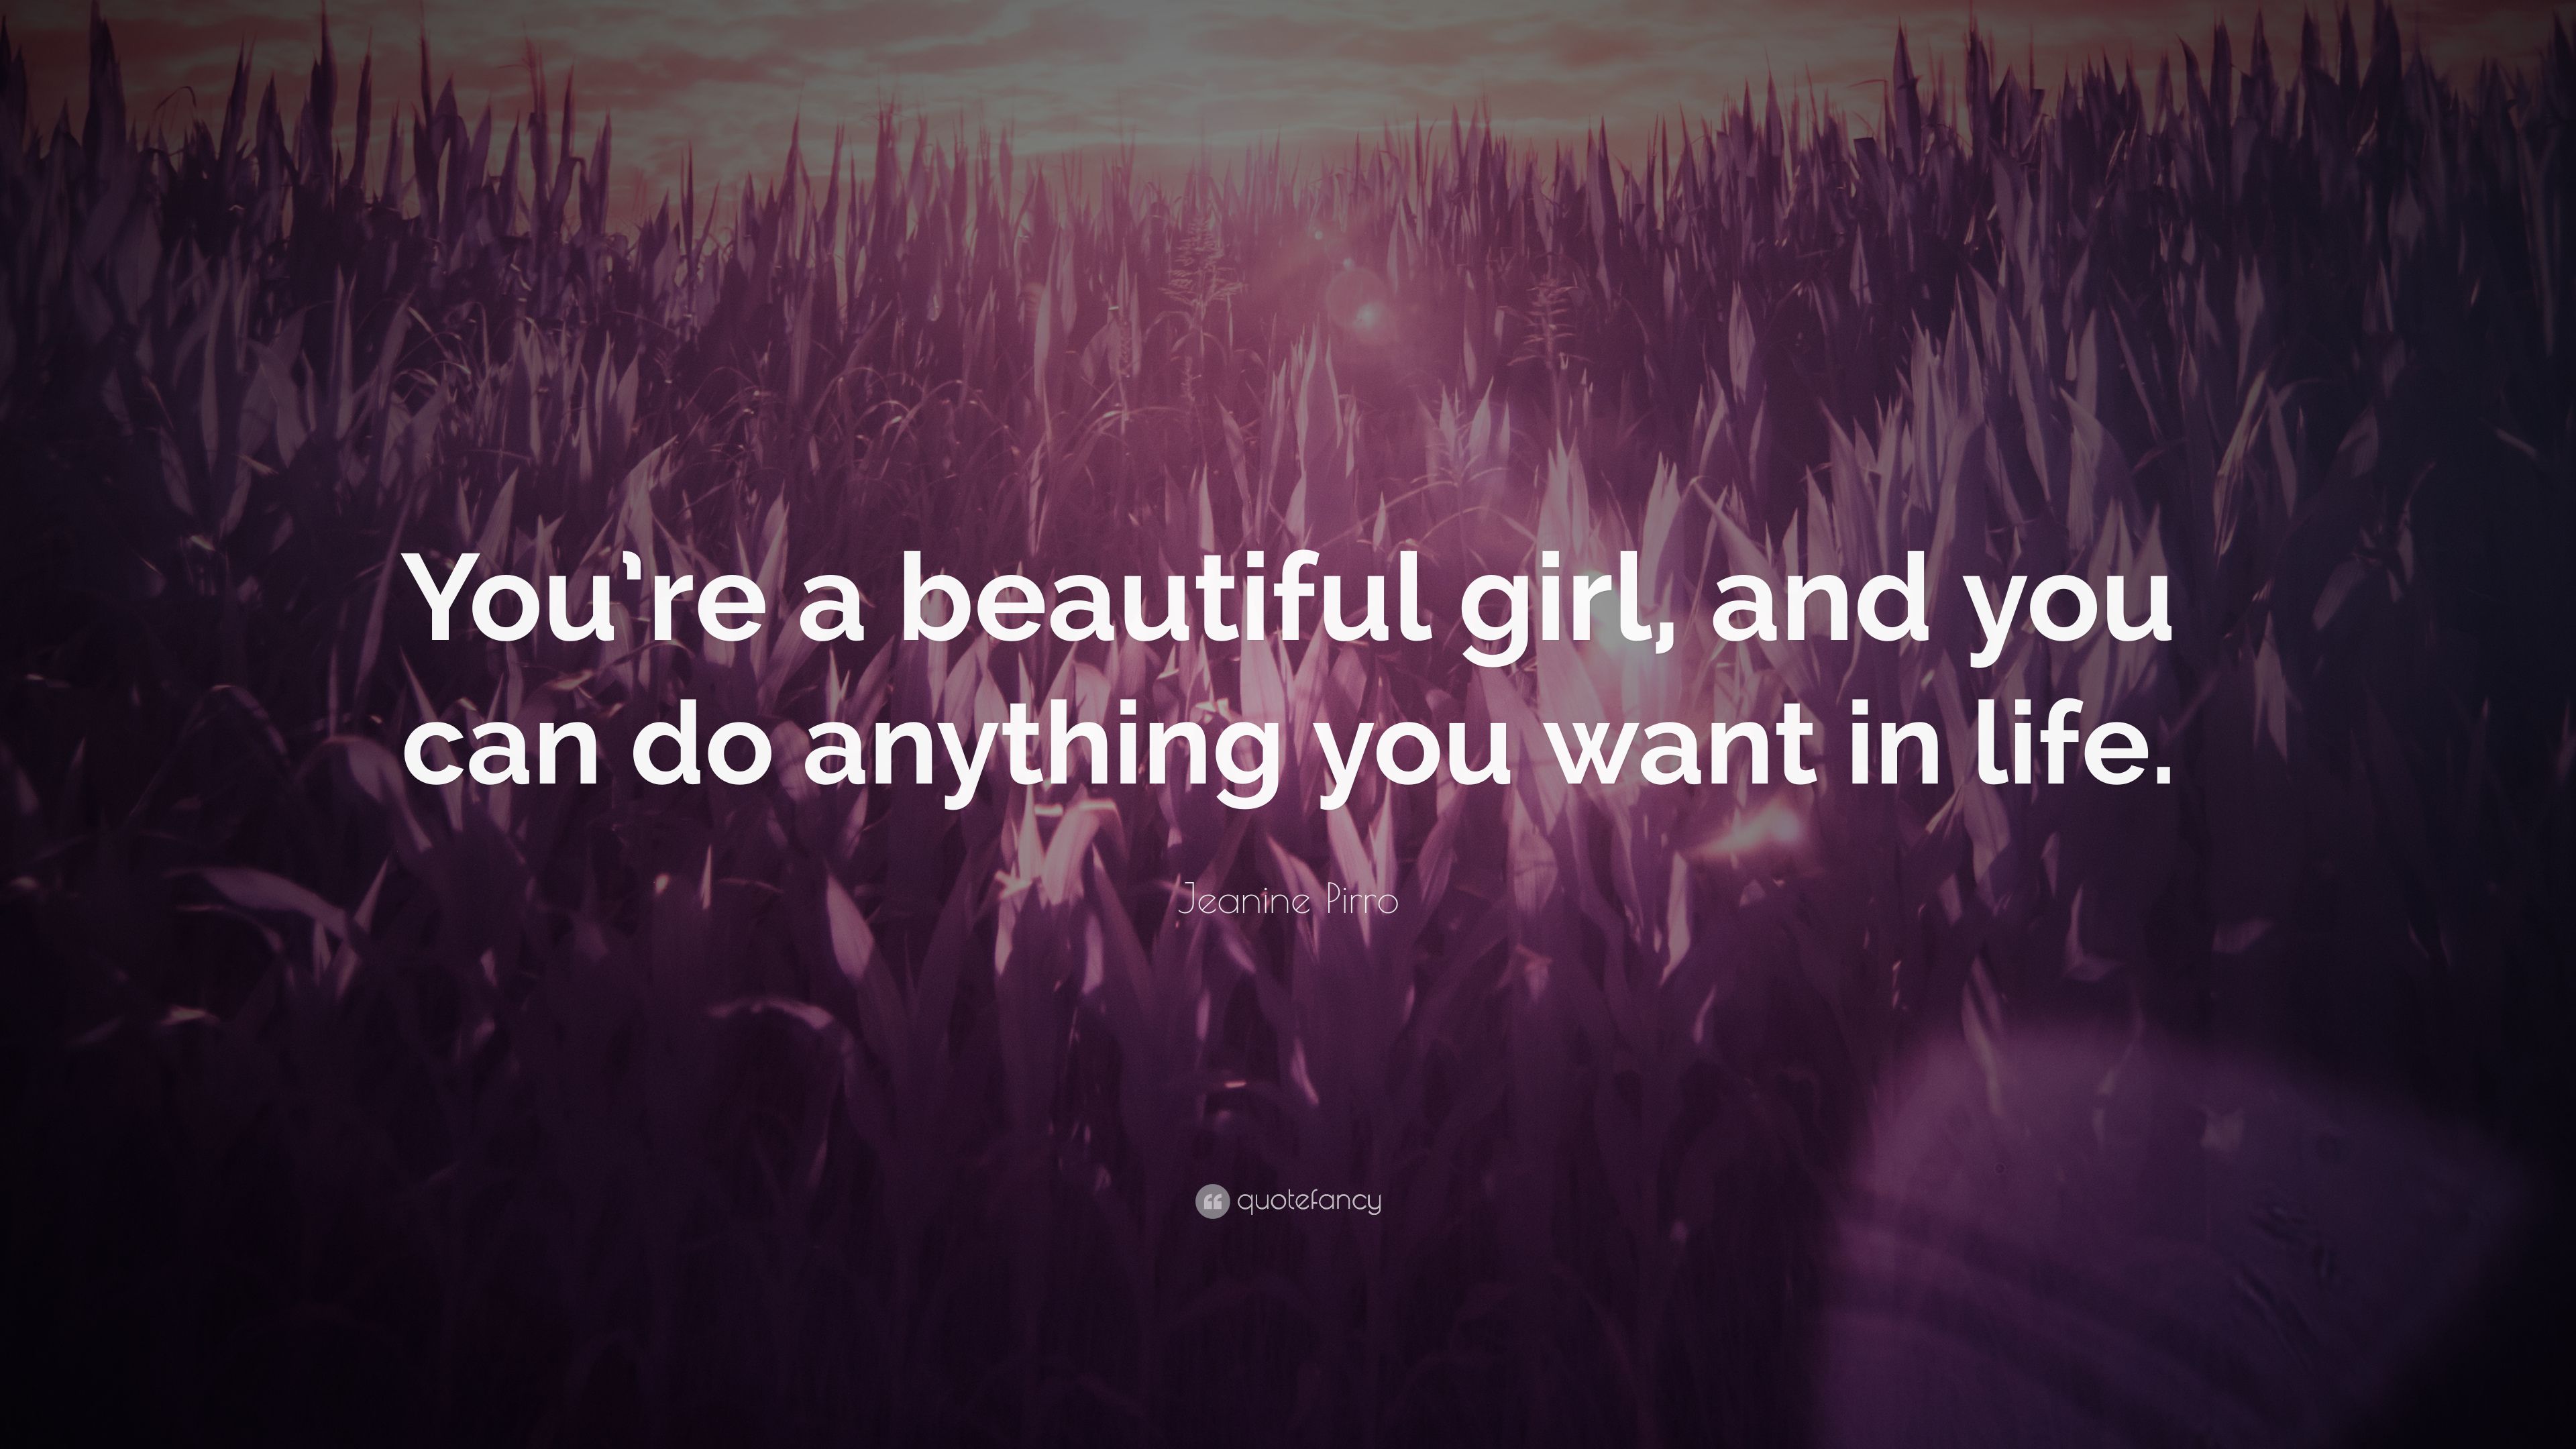 Jeanine Pirro Quote: “You're a beautiful girl, and you can do anything you want in life.” (7 wallpaper)